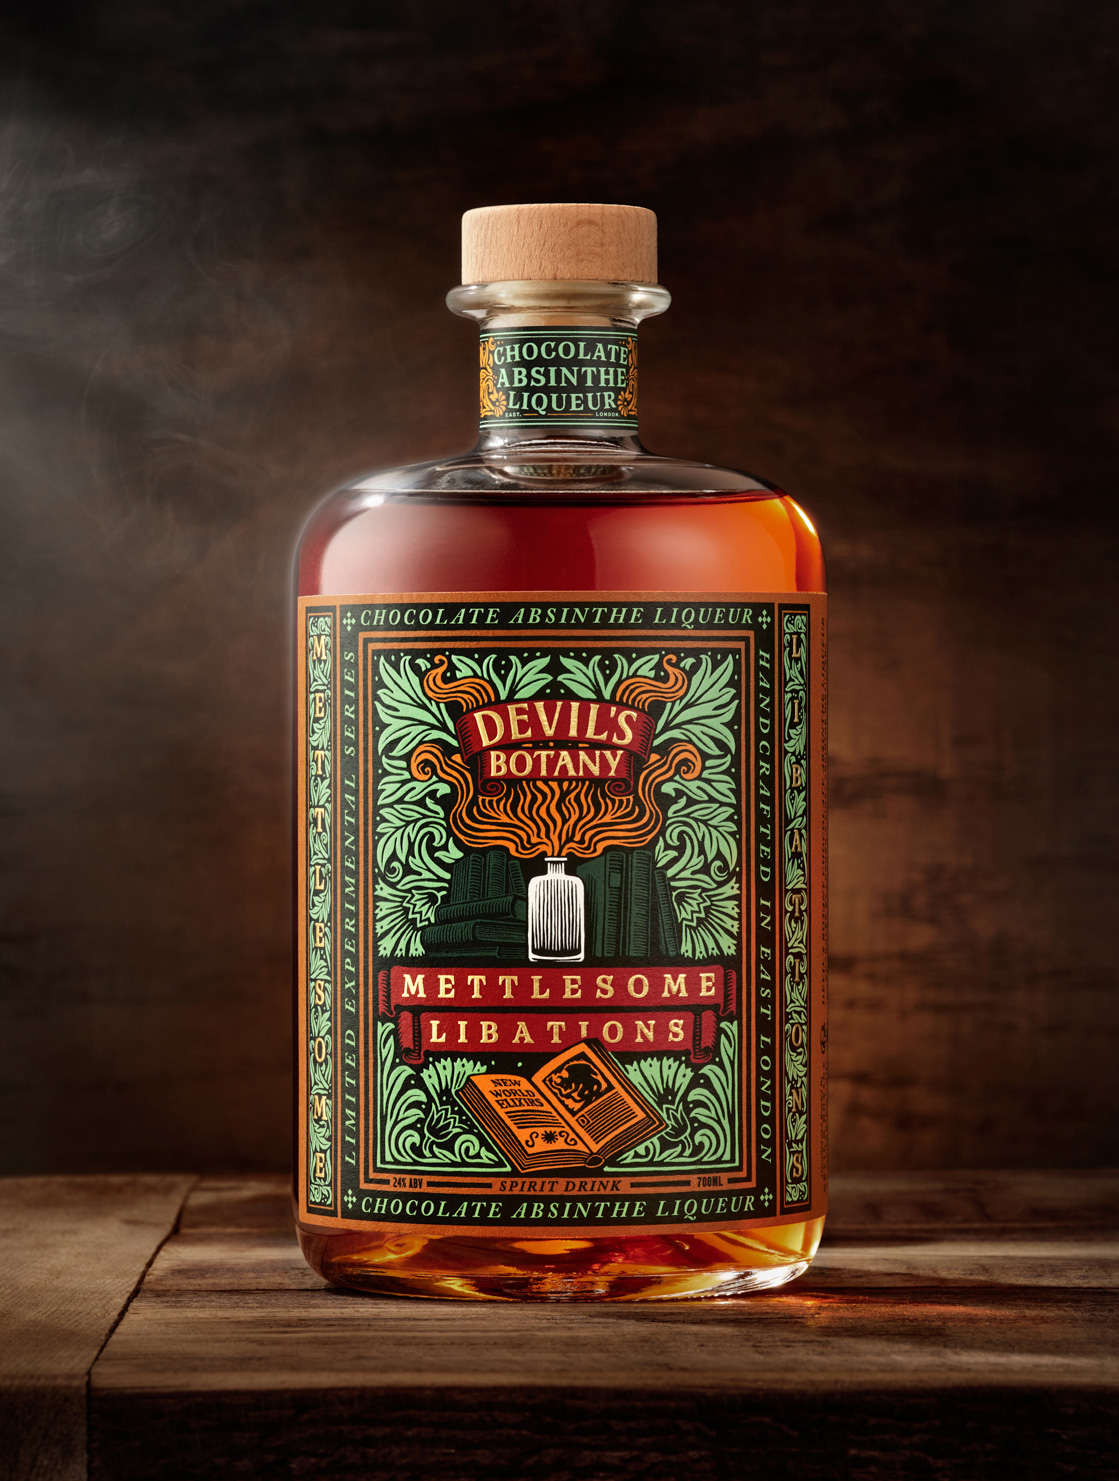 Devil's Botany Distillery's Mettlesome Libations package design by Chad Michael Studio